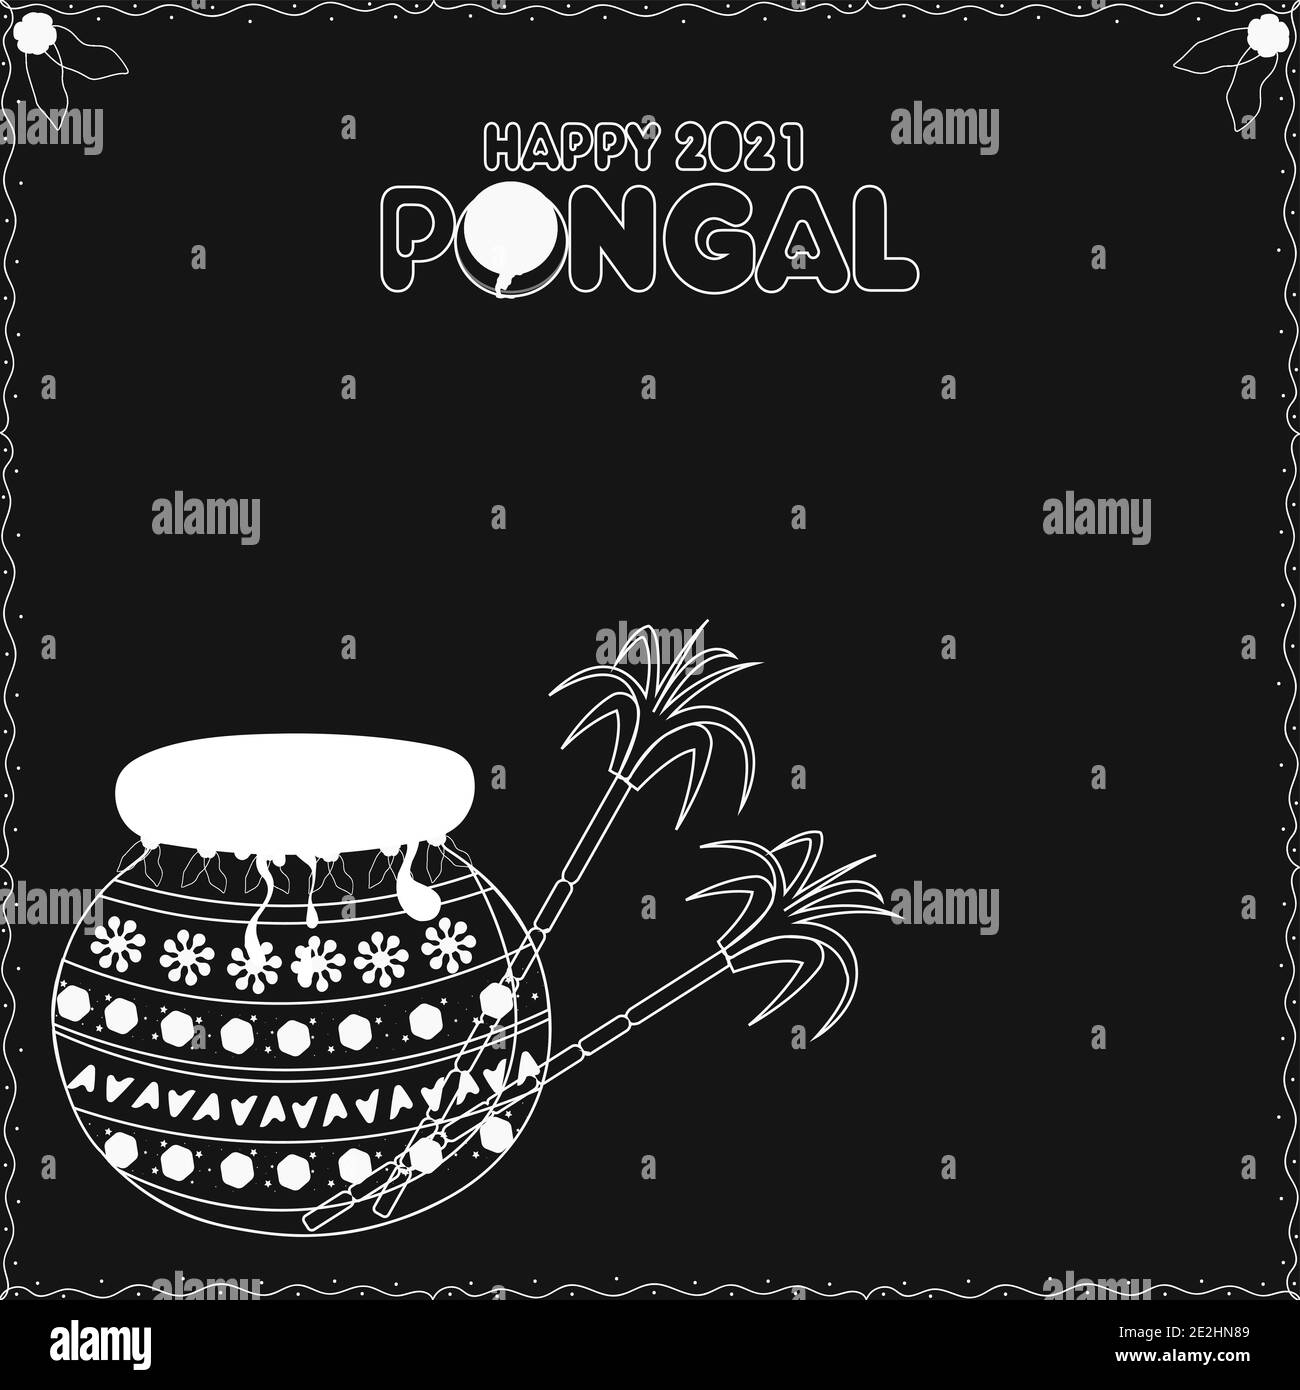 South Indian Festival Happy Pongal Background Template Design Stock Vector